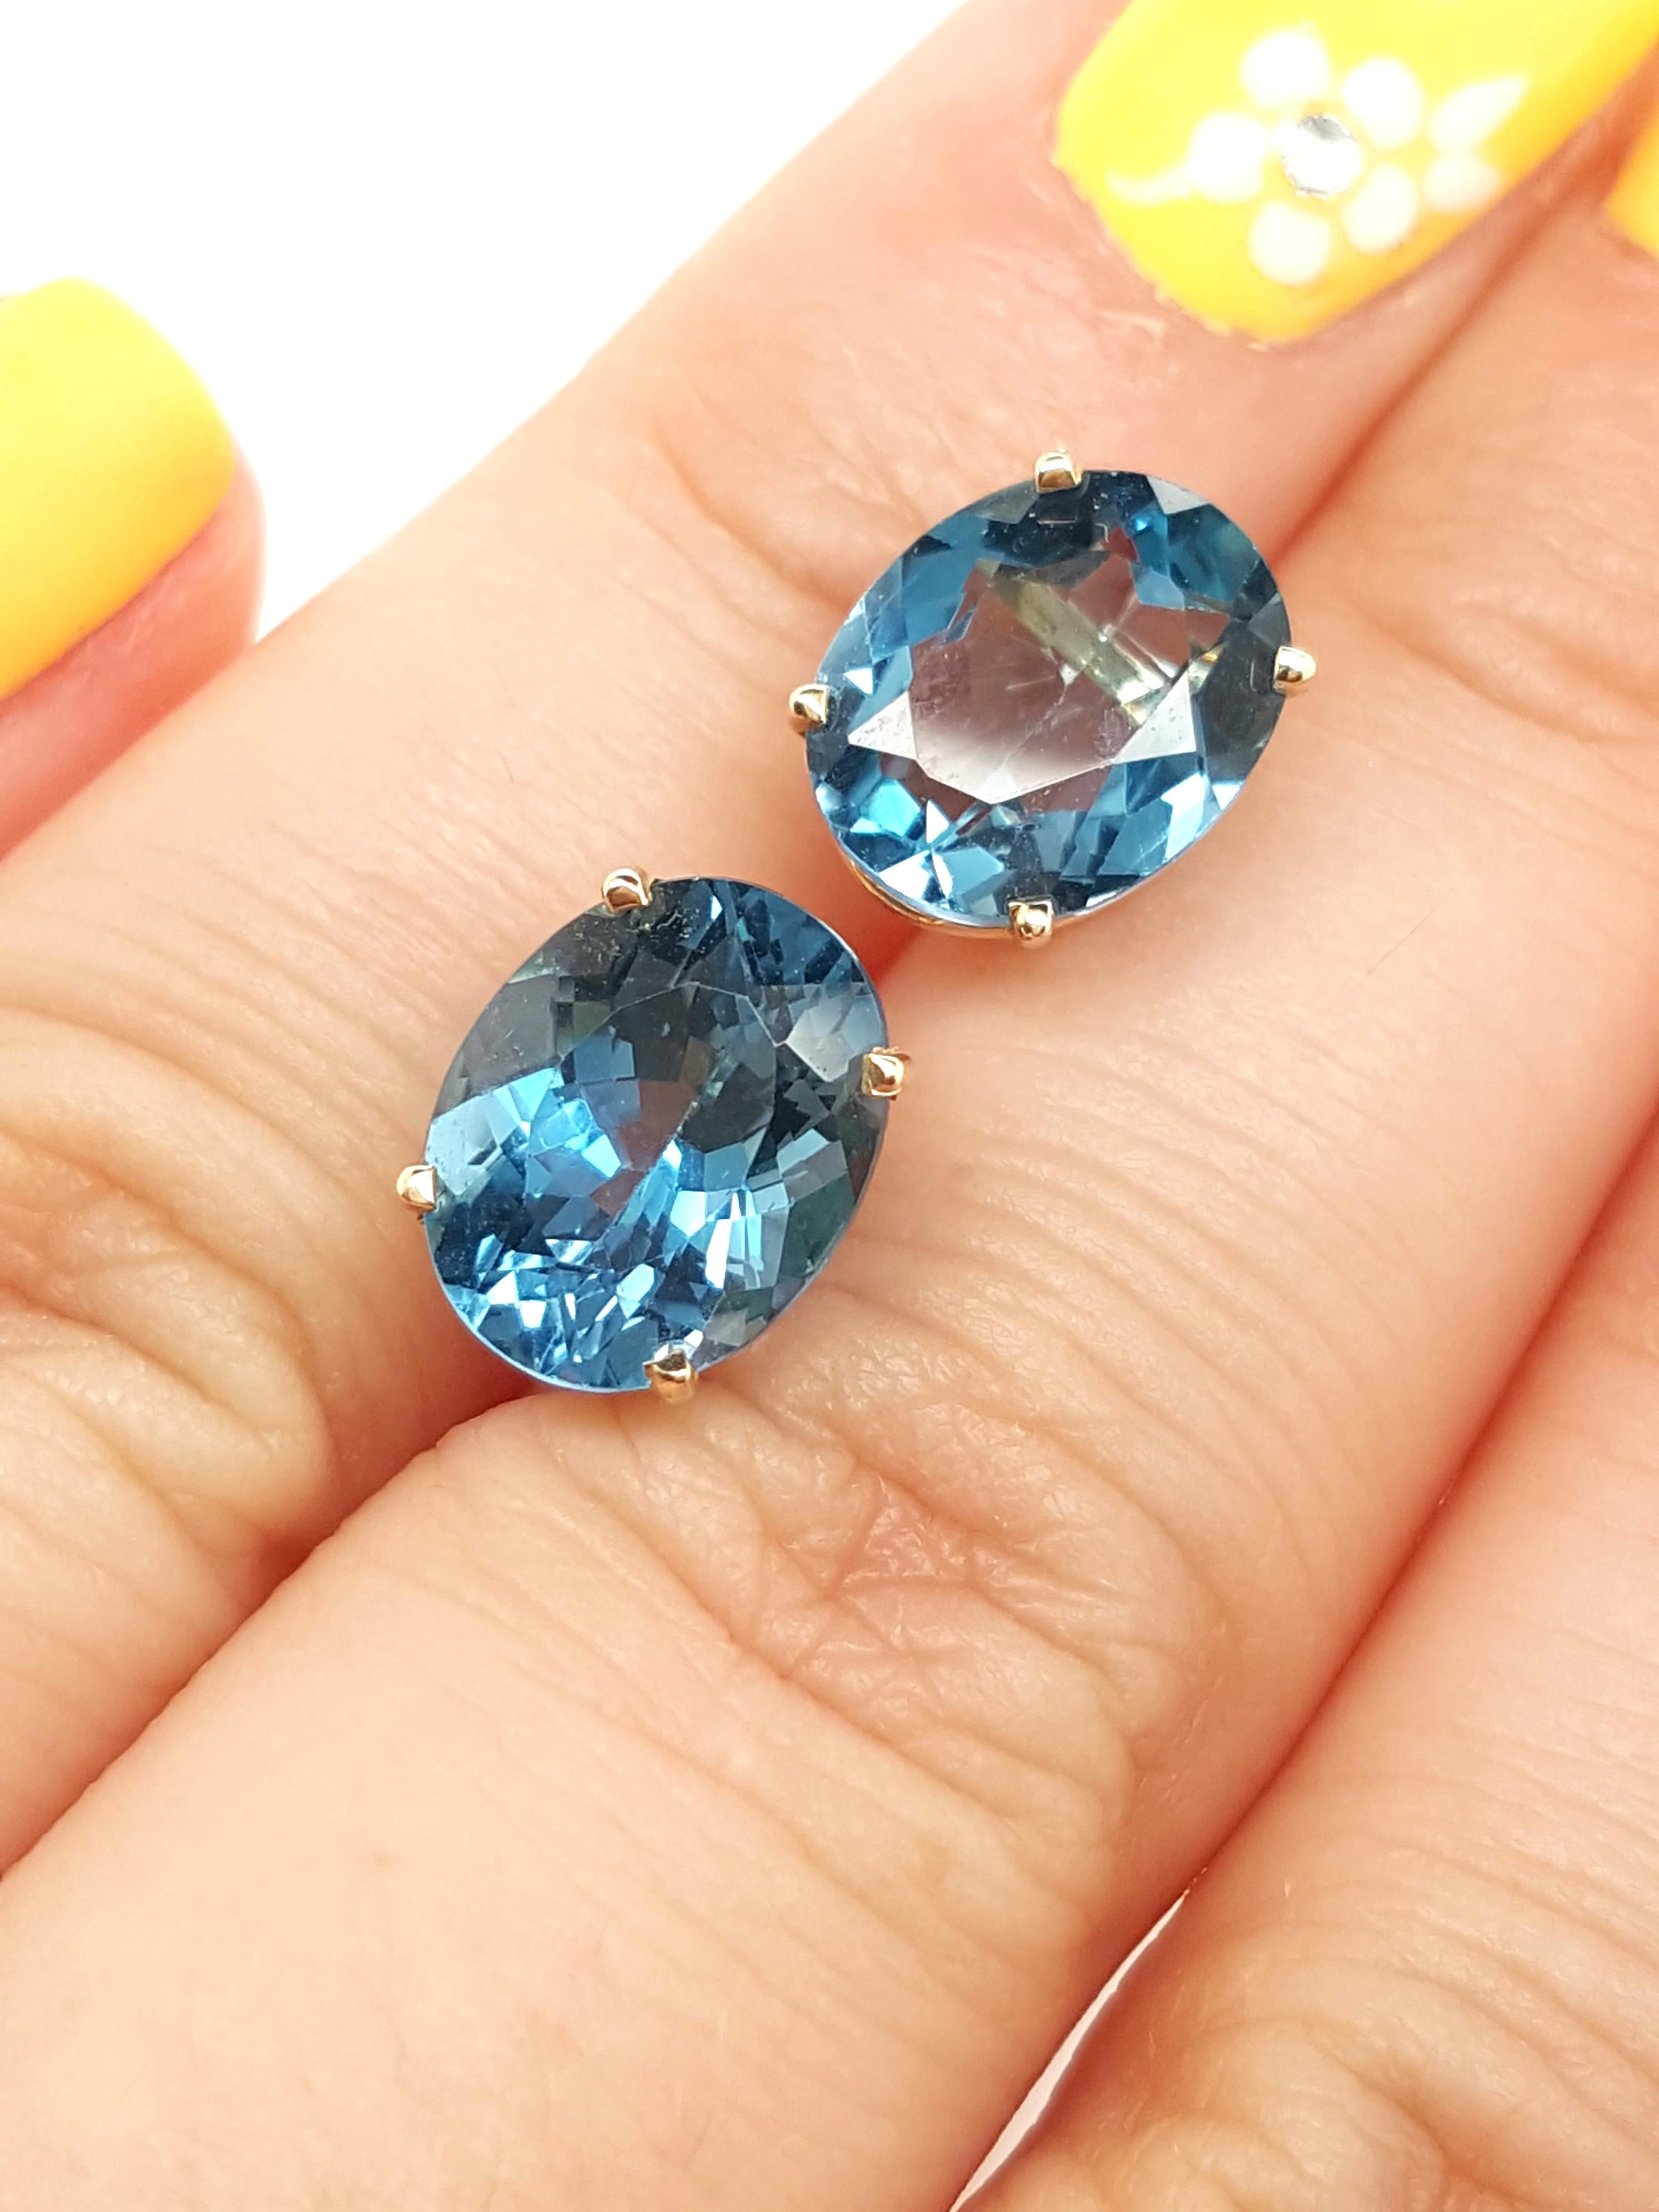  14 Karat Yellow Gold Oval Shaped Blue Topaz Stud Earrings   The earrings feature a matched pair of faceted oval shaped blue topaz weighing approximately 5.69 carats.  The blue topaz are each set into a 14 karat yellow gold four prong basket,